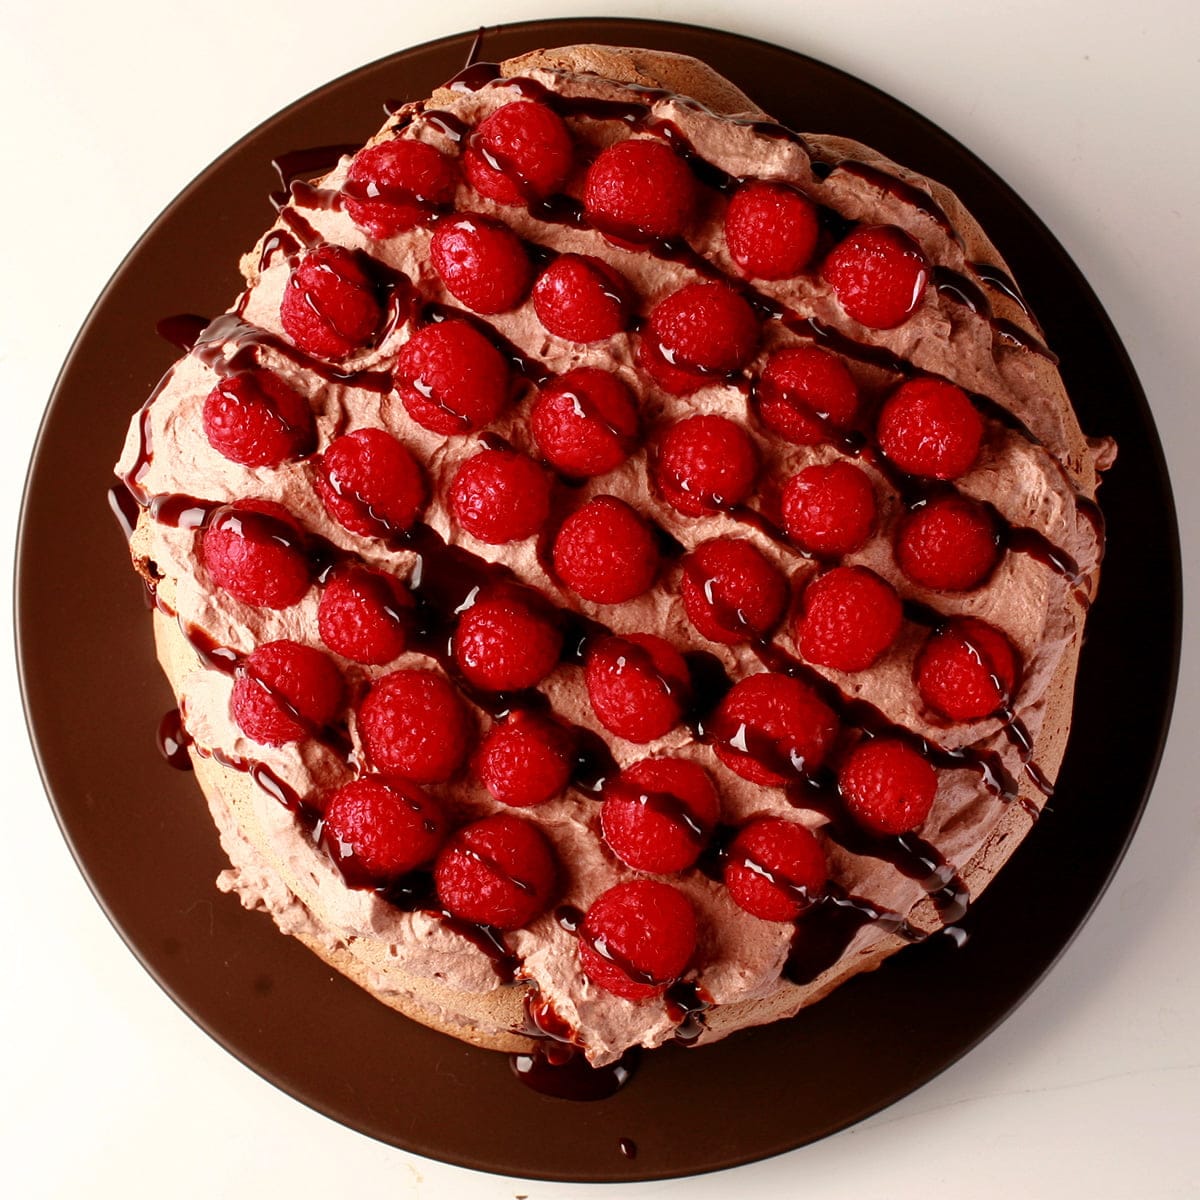 Top view of a chocolate raspberry pavlova. A round meringue is topped with chocolate whipped cream, raspberries, and chocolate sauce.